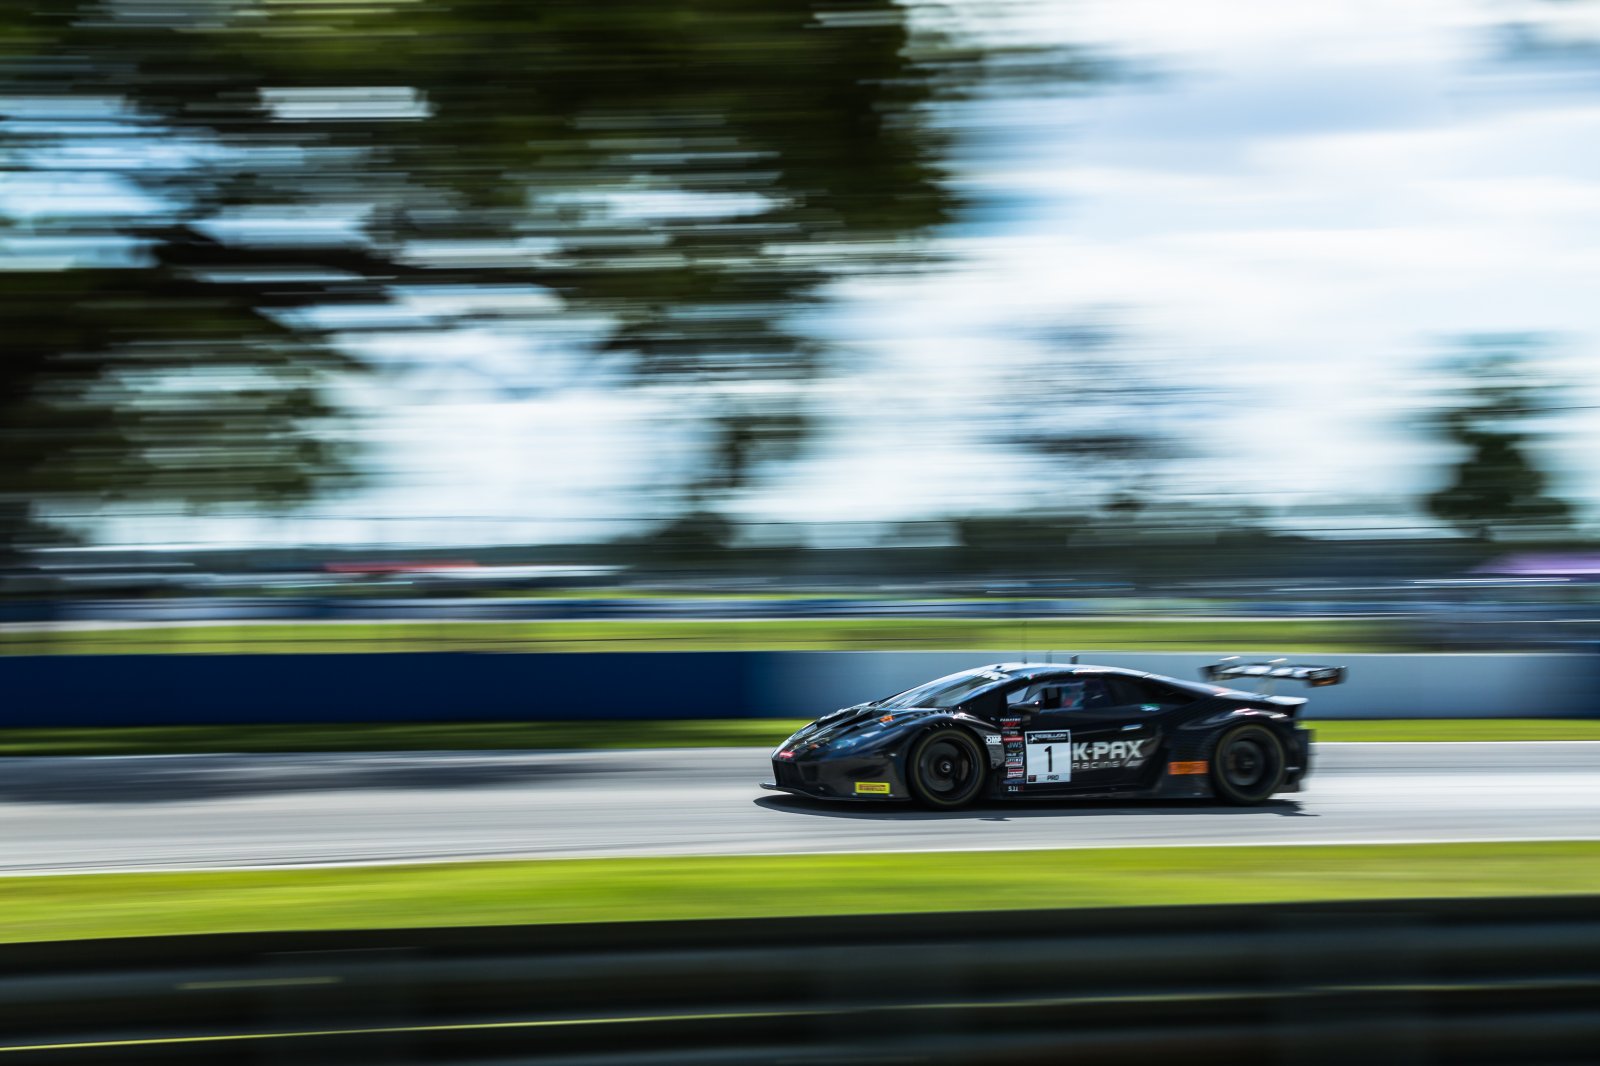 K-PAX Racing Sweeps Weekend Races and Secures Pro Championship, Wright Motorsports Takes the Win and Points Lead in Pro-Am, 2022 Am Champions Triarsi Competizione Win Again